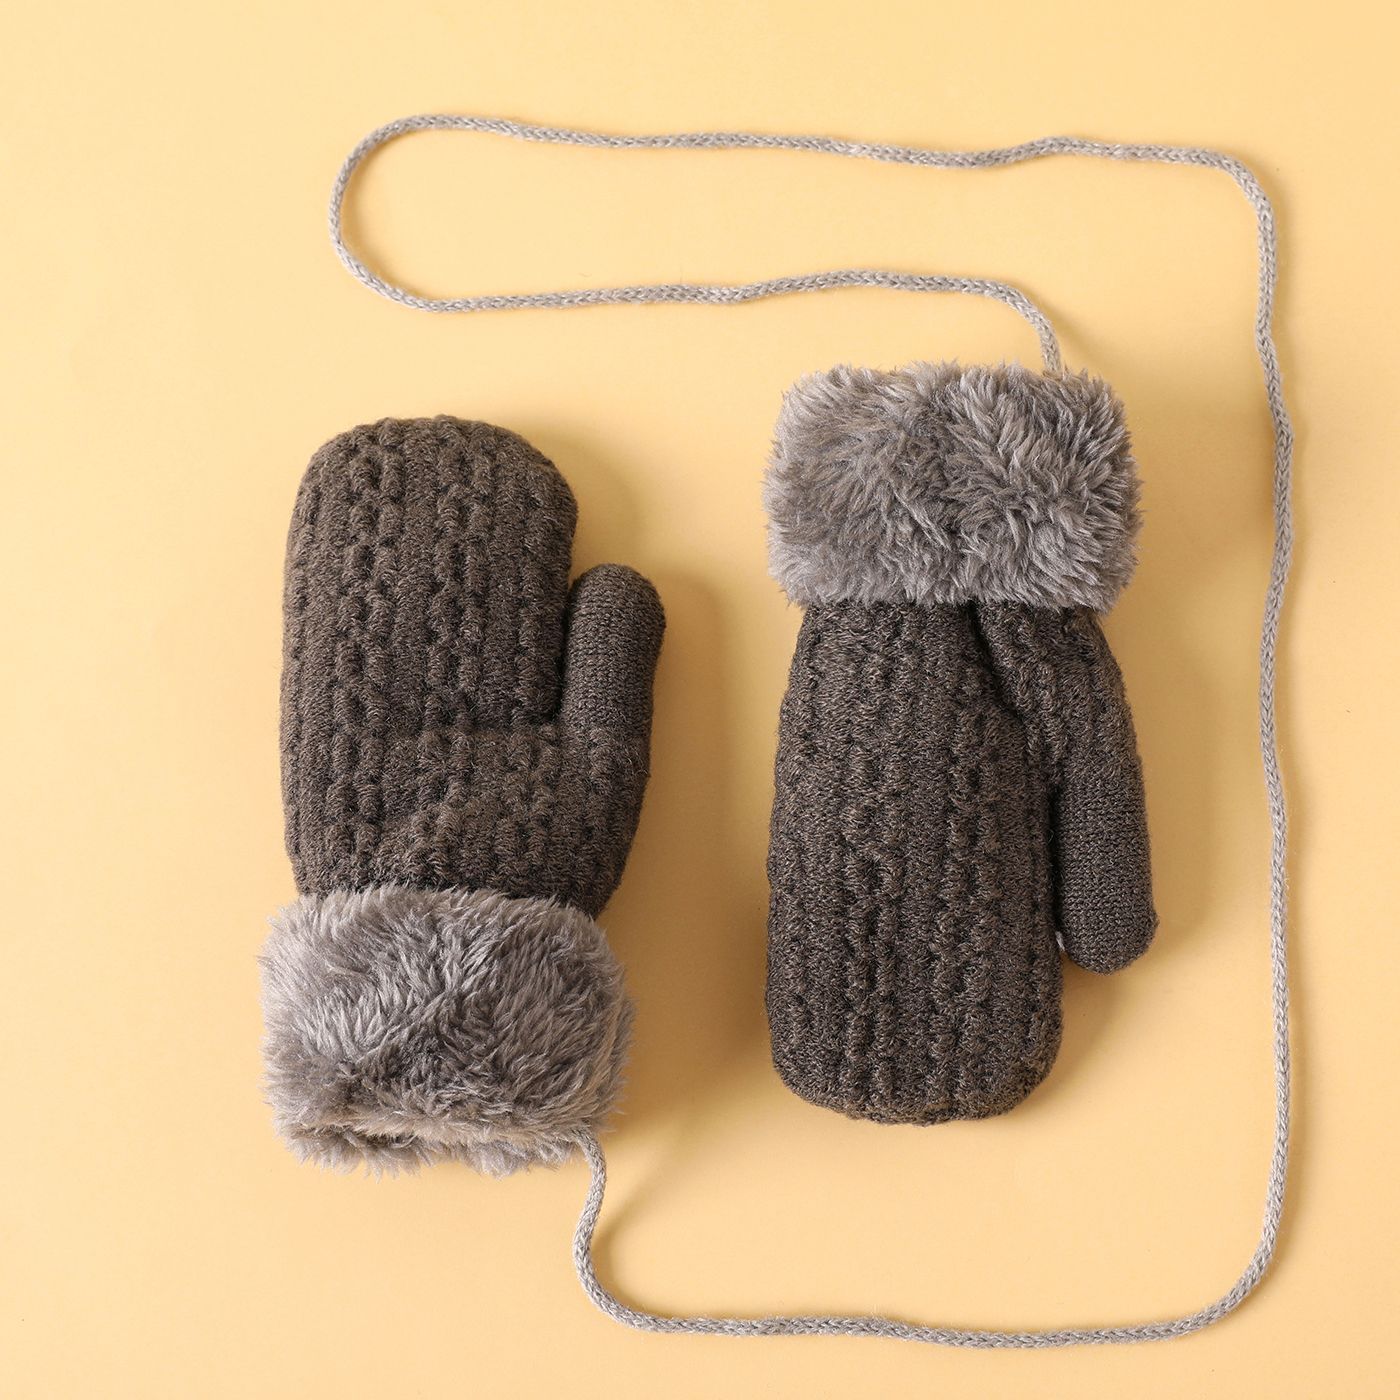 Toddler Plush Mittens with String